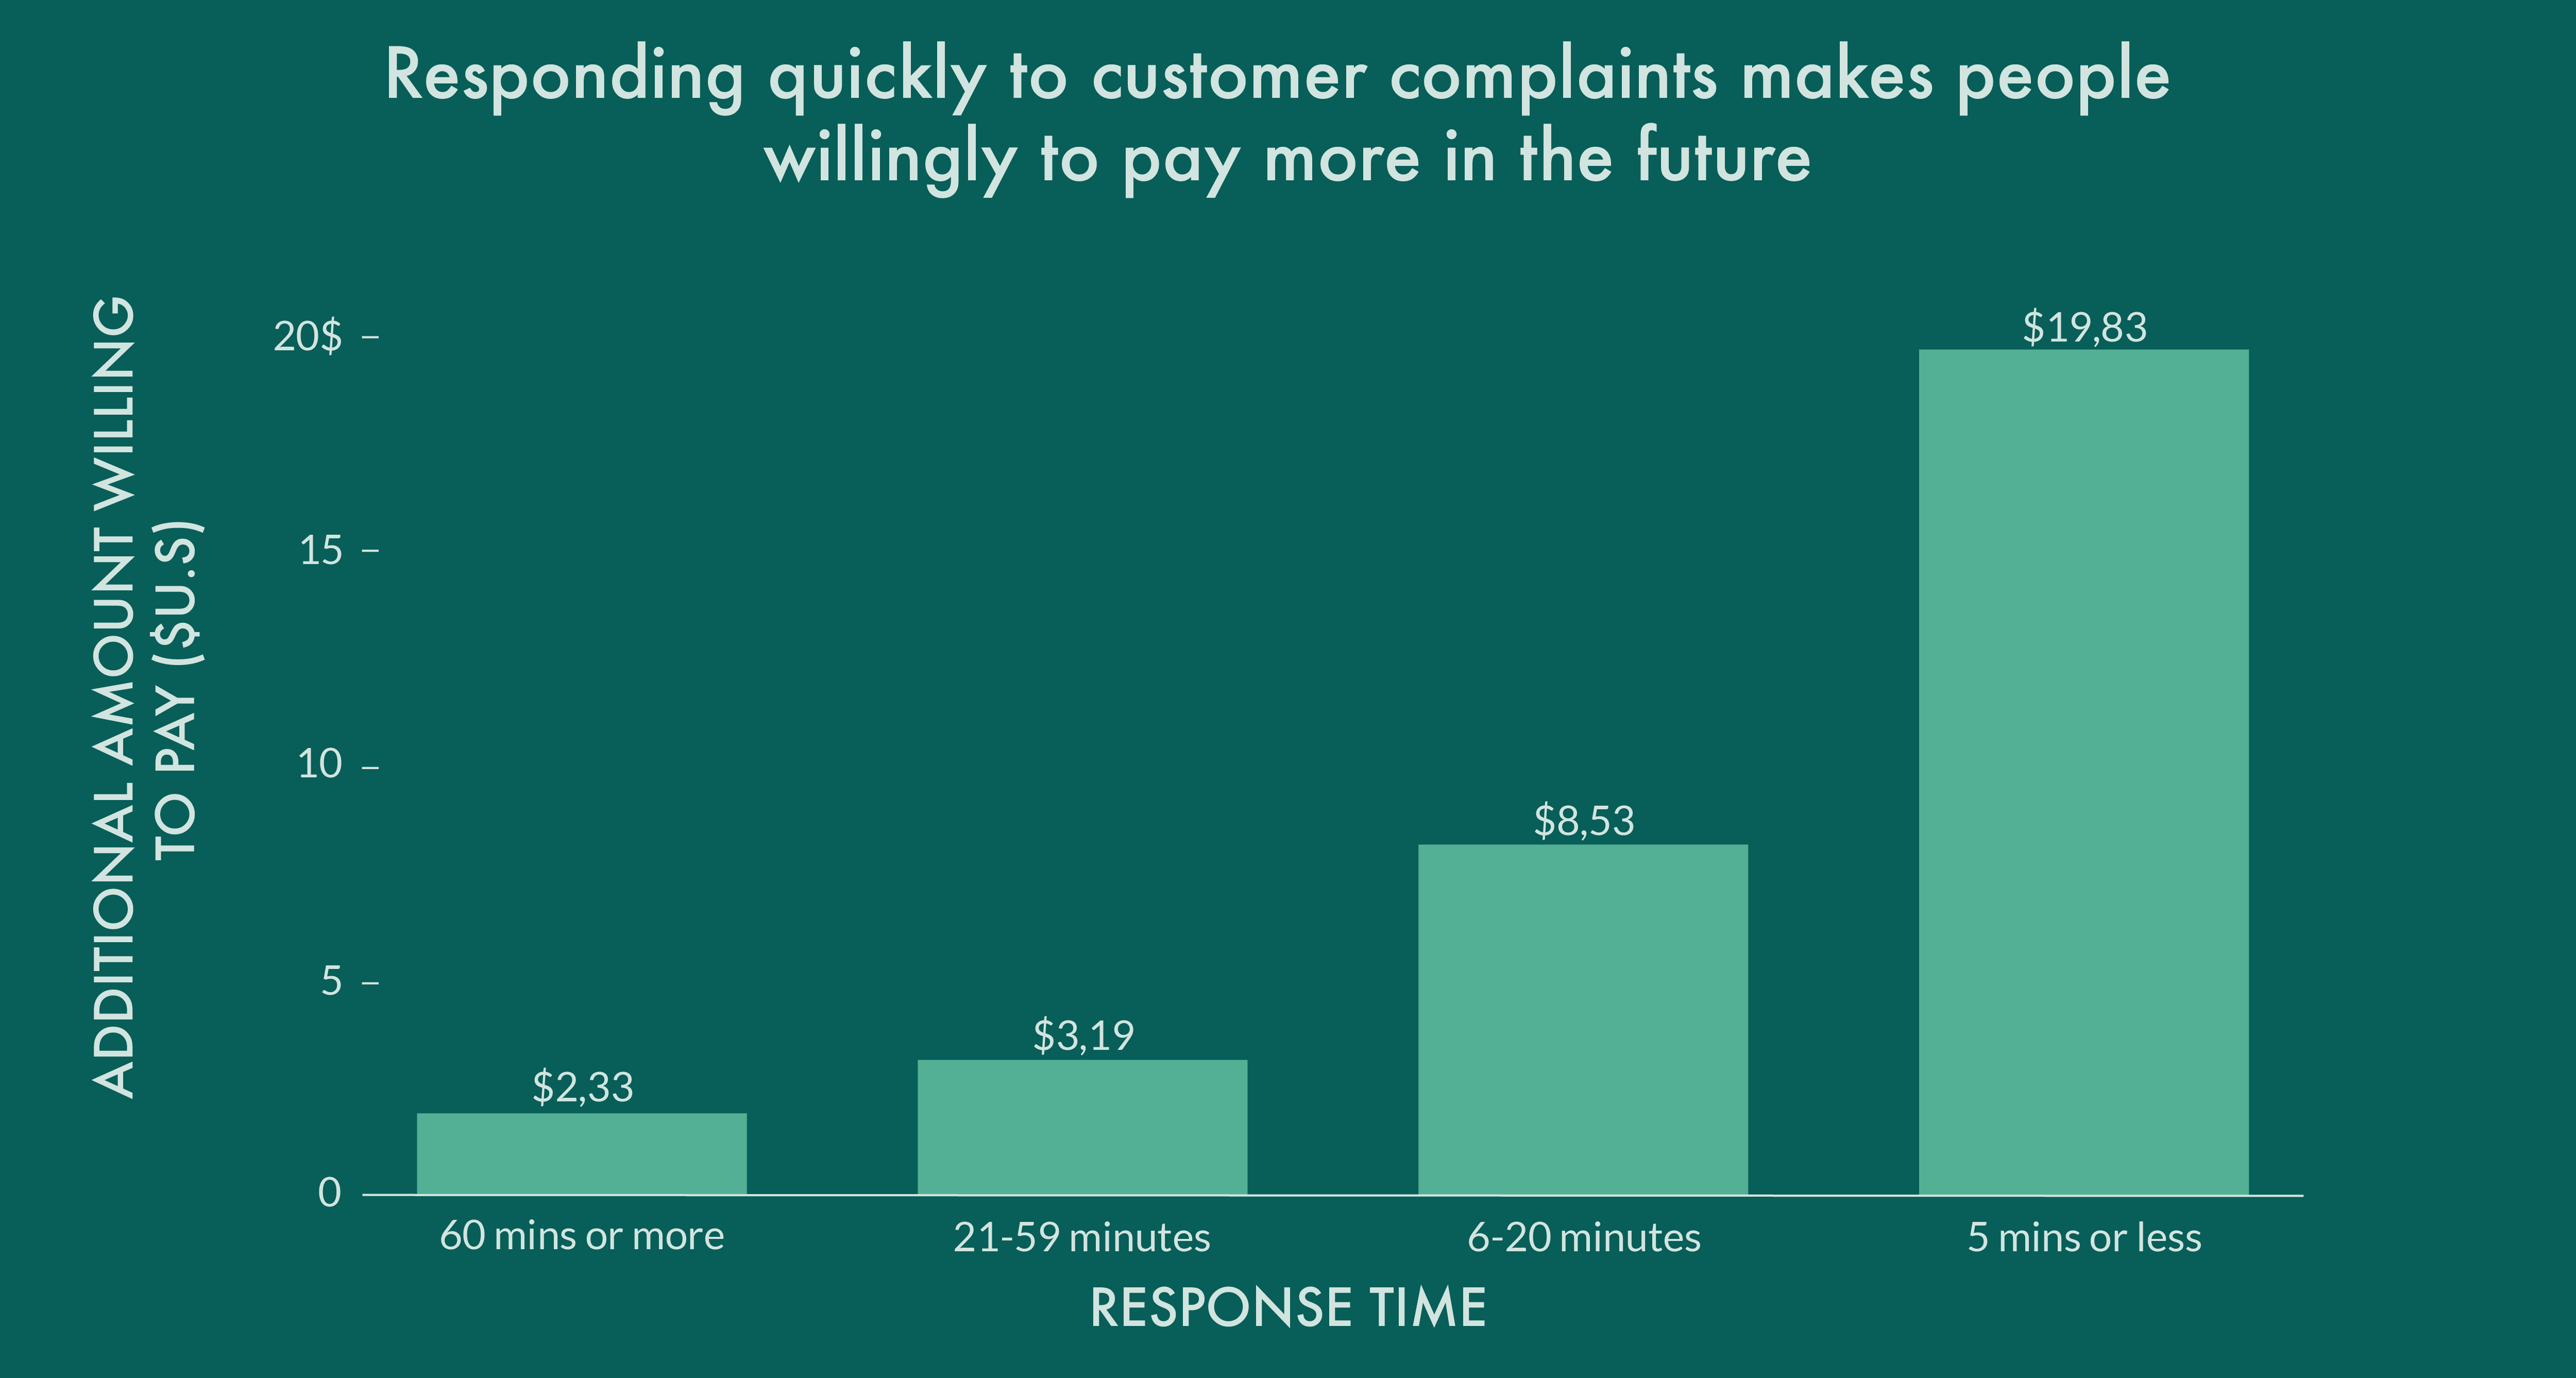 How fast response times impact customer loyalty